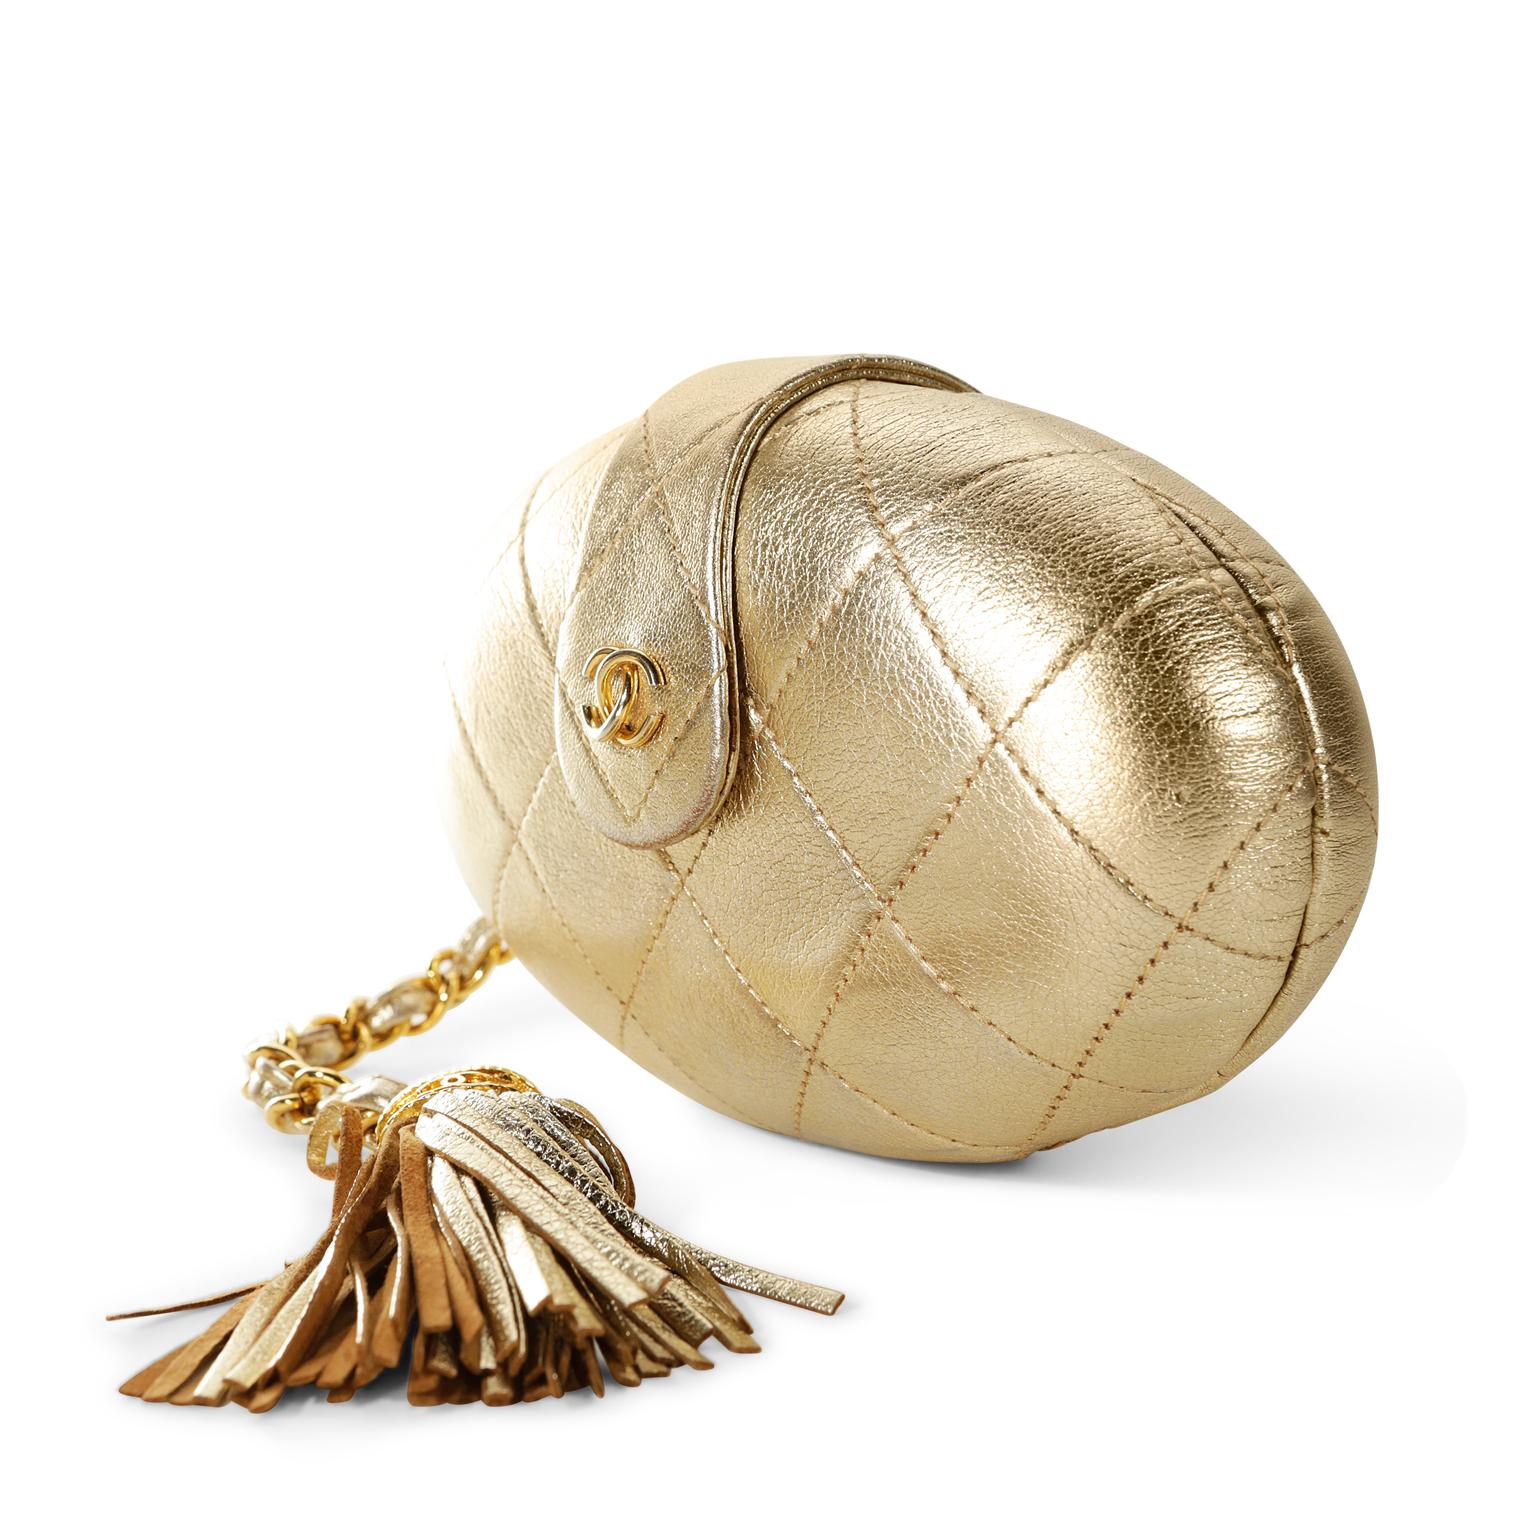 Chanel Gold Oval Leather Vintage Clutch - excellent condition
 A rare style in exquisite condition, it is a must have for collectors.
Gold metallic leather small oval clutch is stitched in signature Chanel diamond pattern. Large leather tassel on